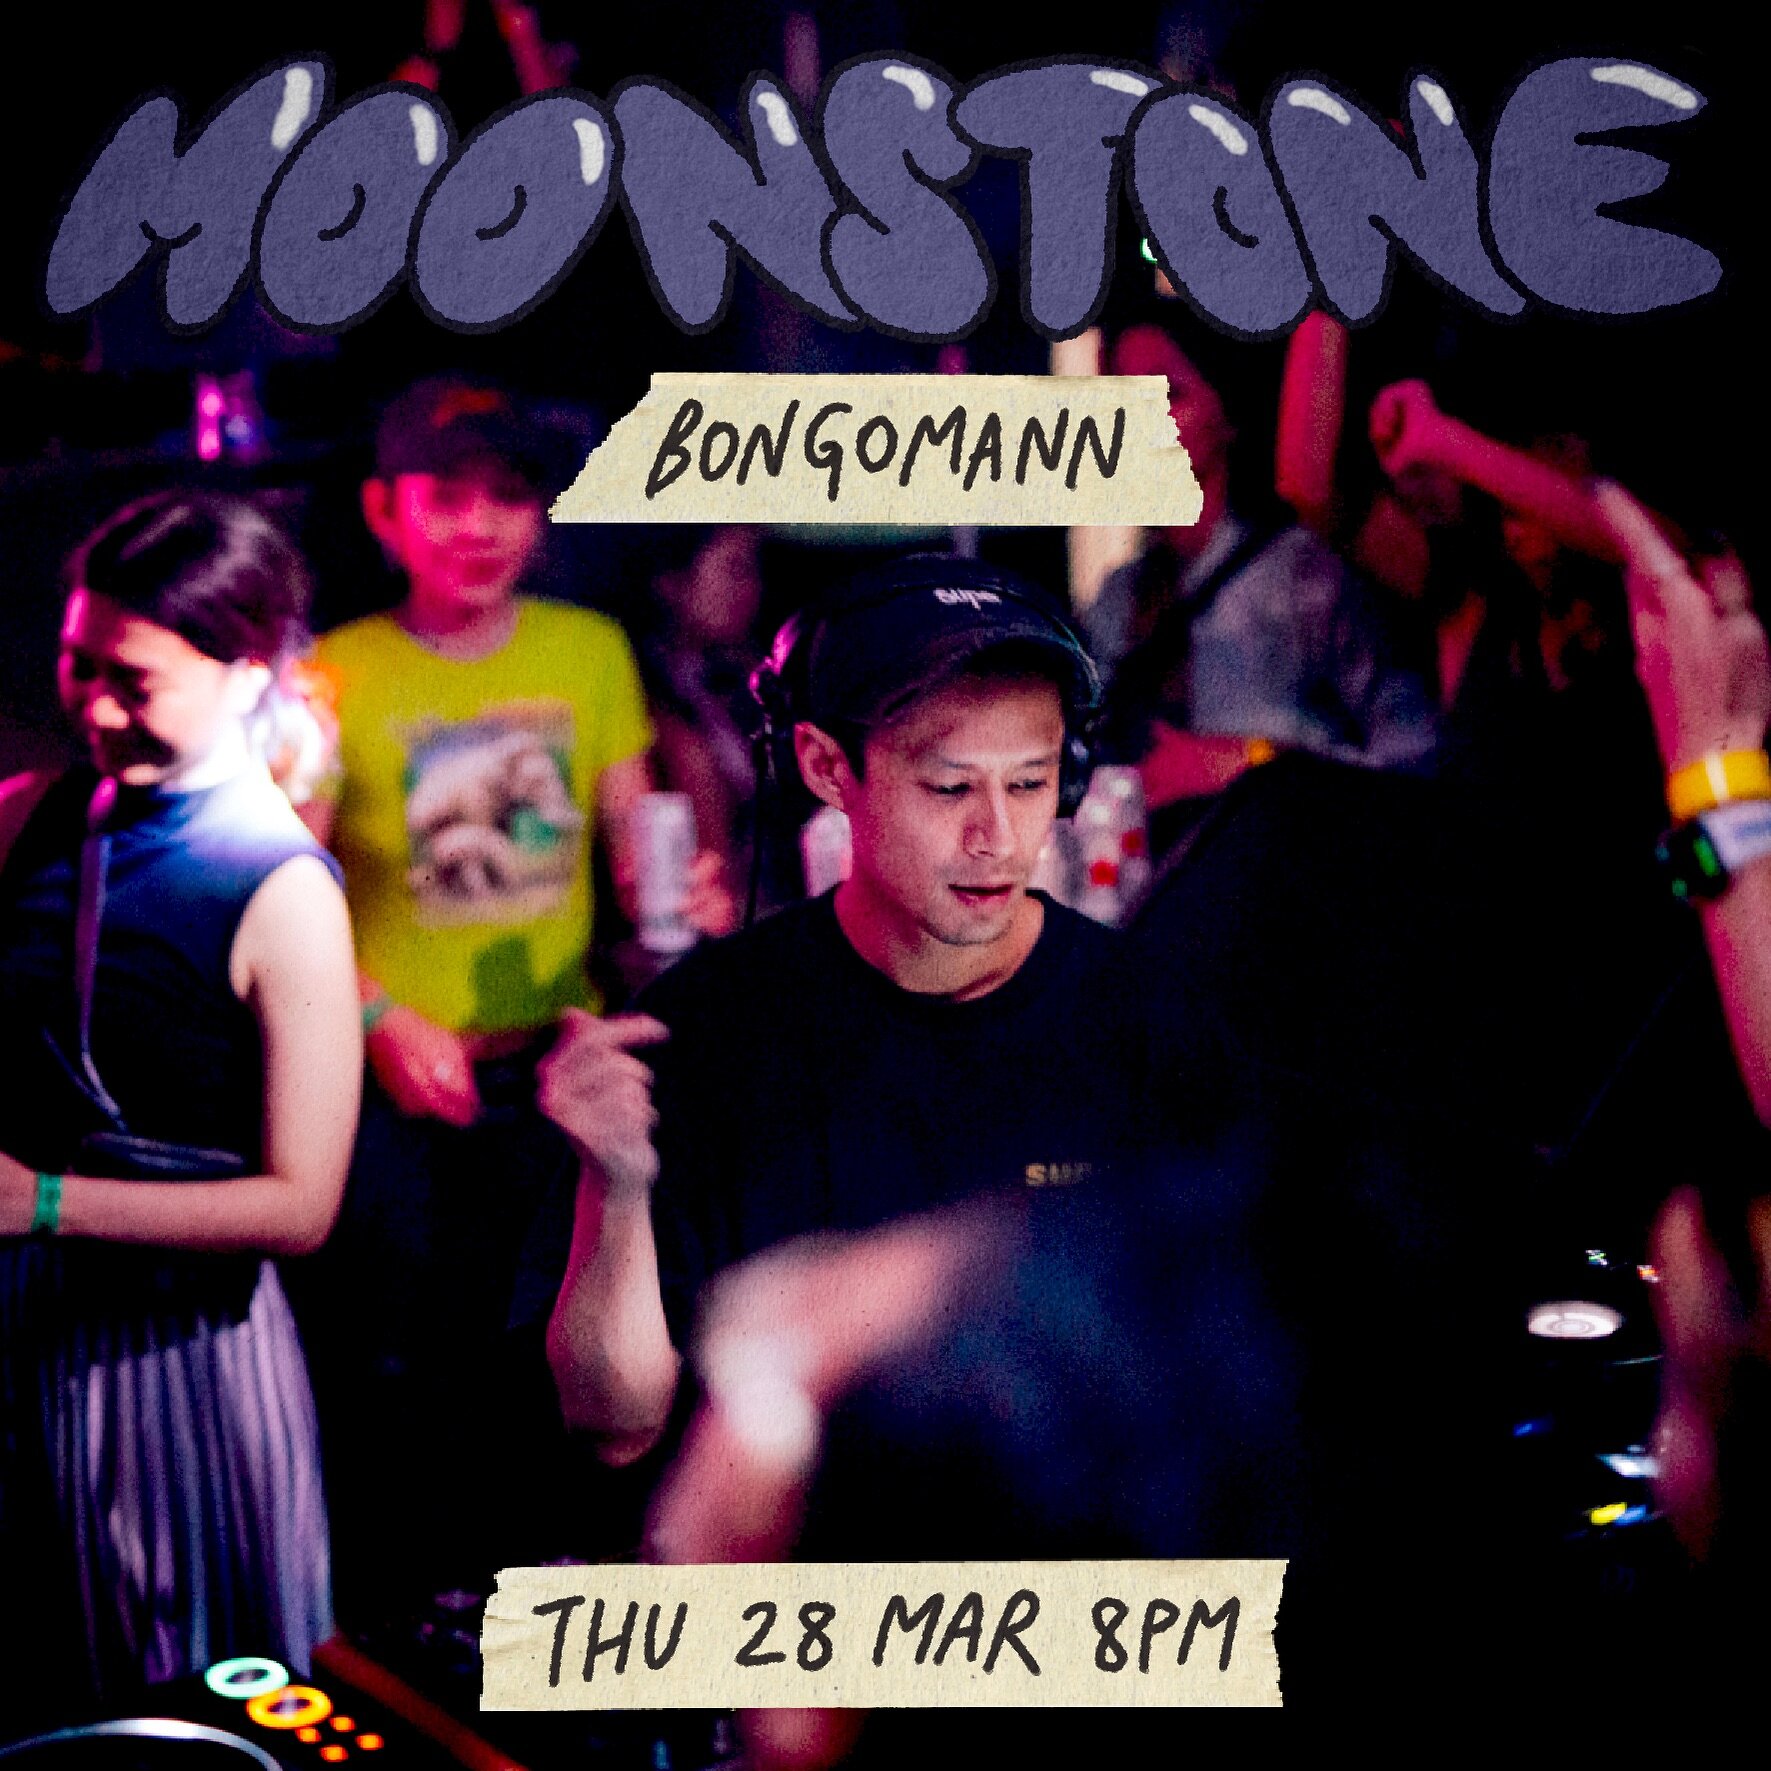 You gotta have soul, you gotta have class and a little not-funk and not-quite-jazz-jazz for your thursday night as Bongomann takes the decks!

Bongomann (real name Nick Bong) expresses himself through a wide spectrum of more dreamy and ambient nuance